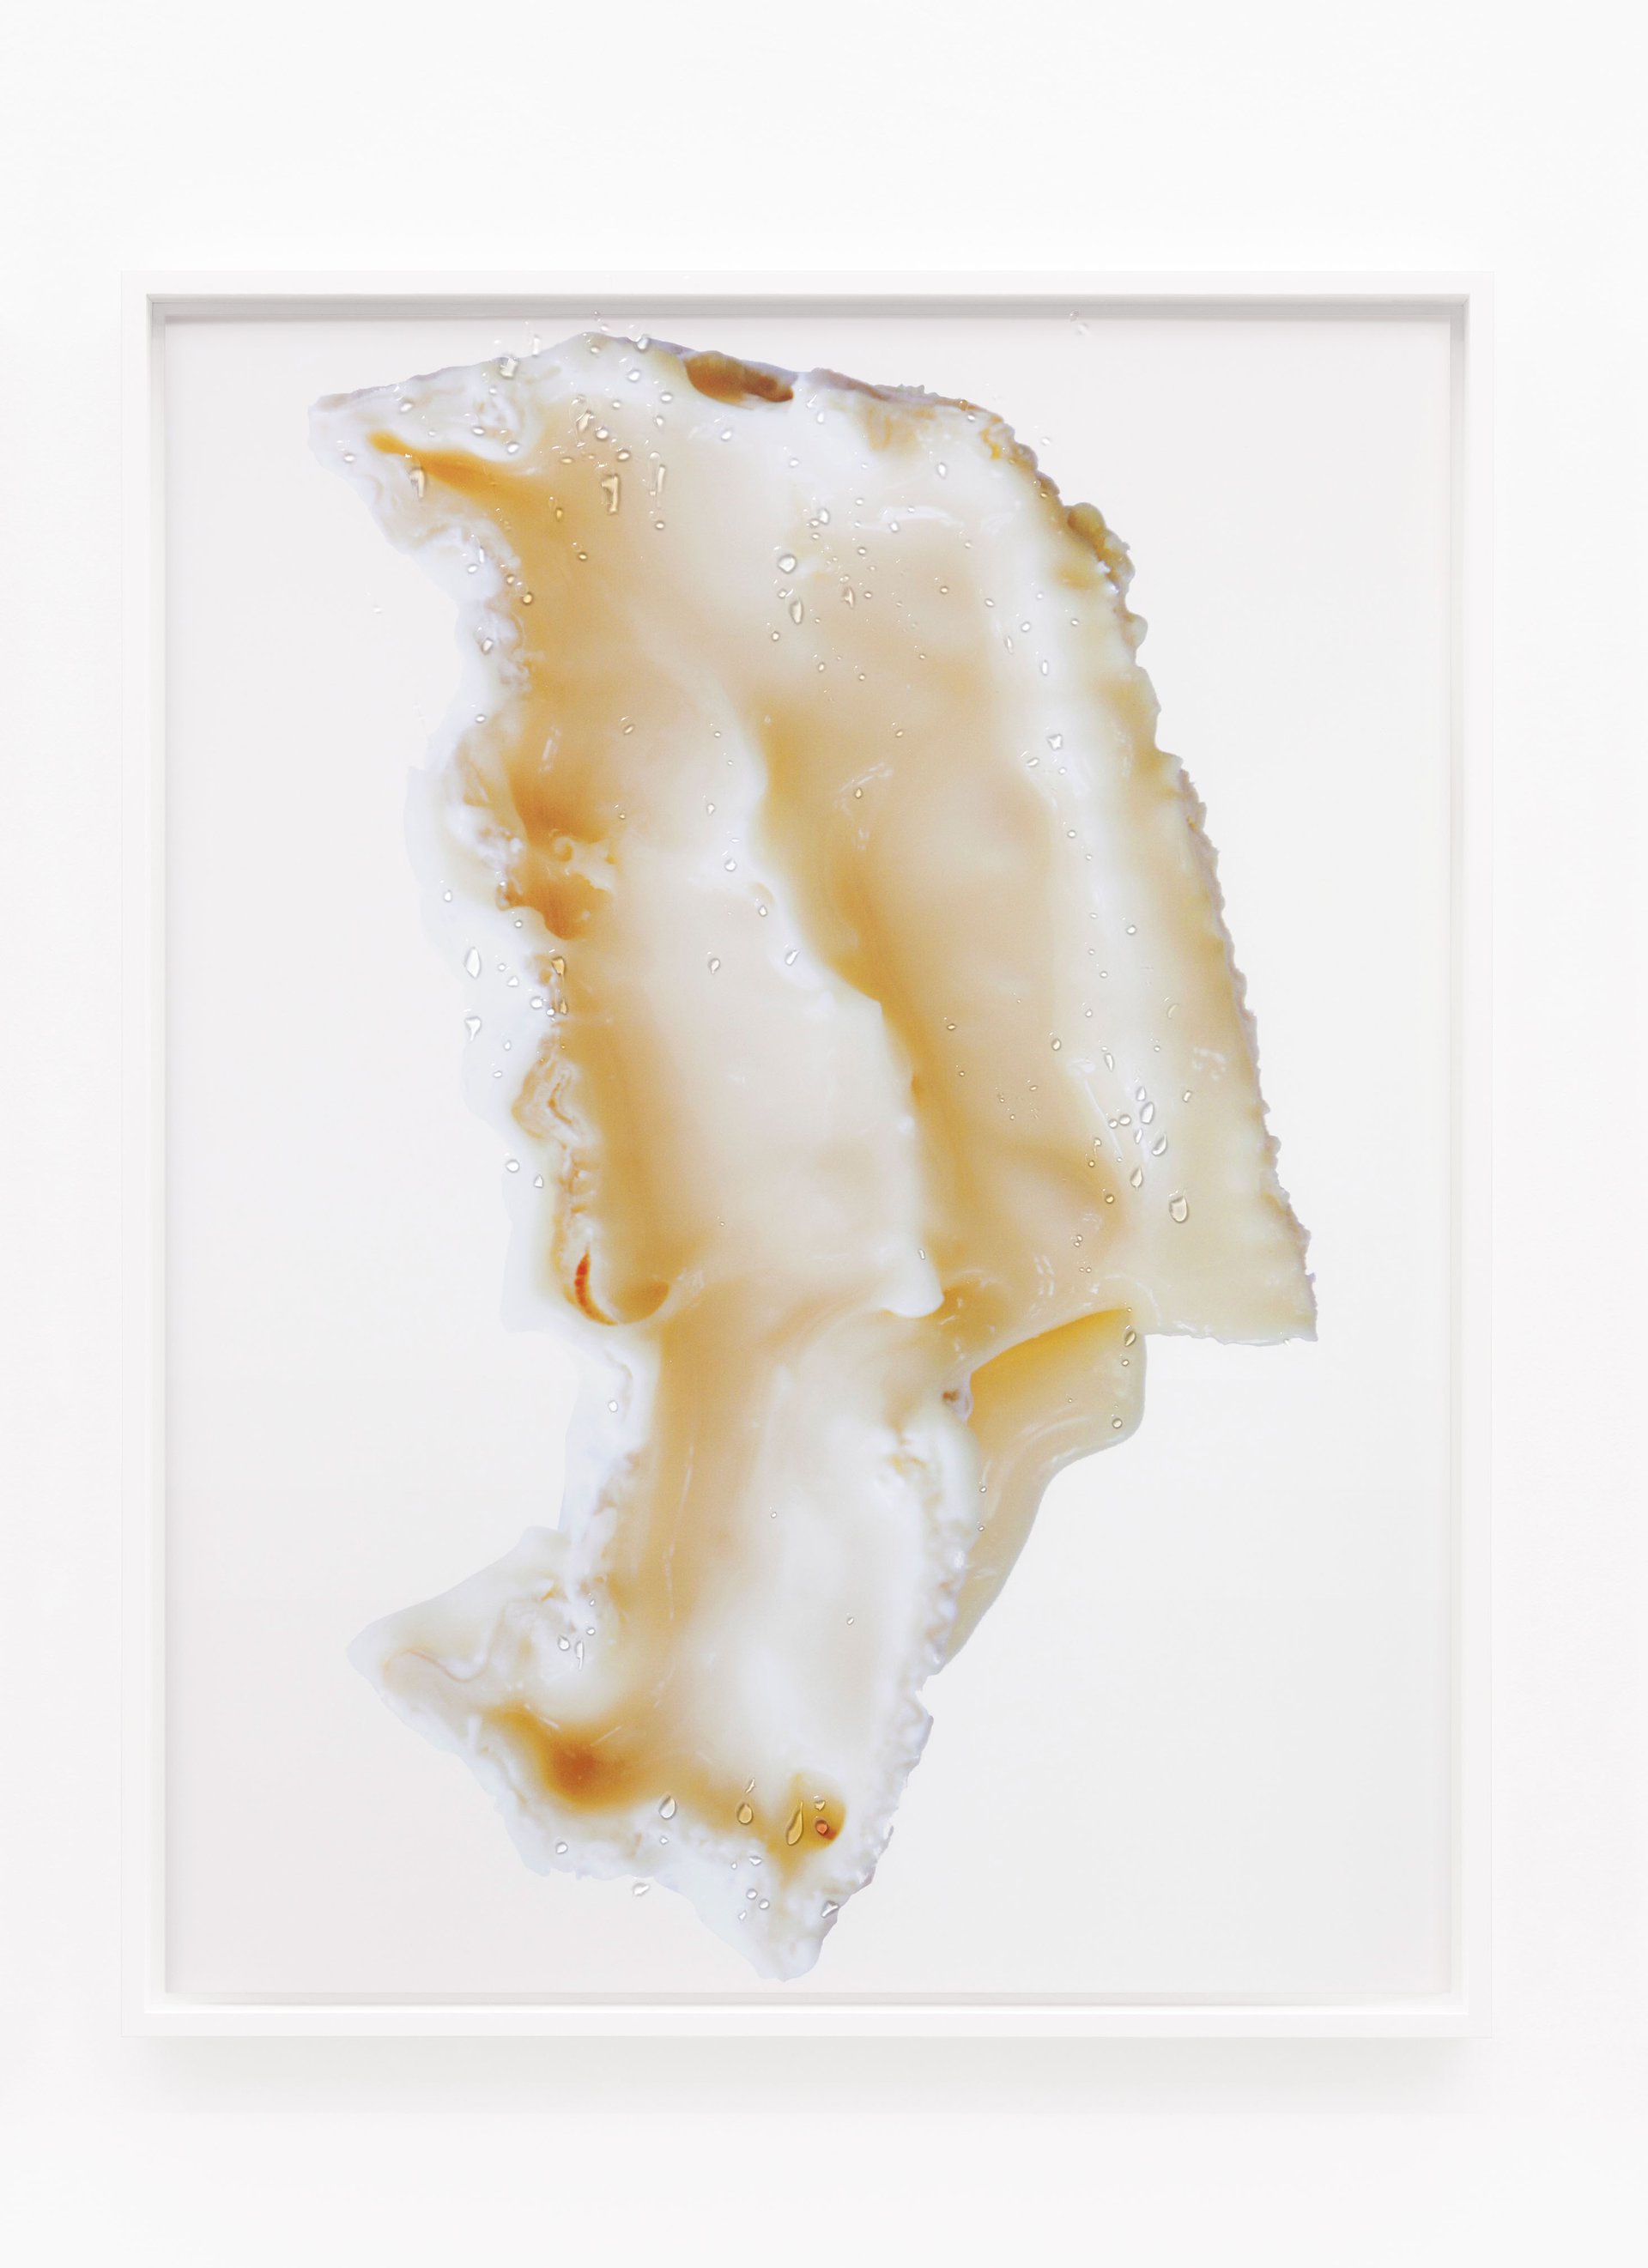 Lisa HolzerThe Man Who Is Unhappy, 2015Crystal Clear 202/1 polyurethane on glass, pigment prints on cotton paper92 x 72 cm